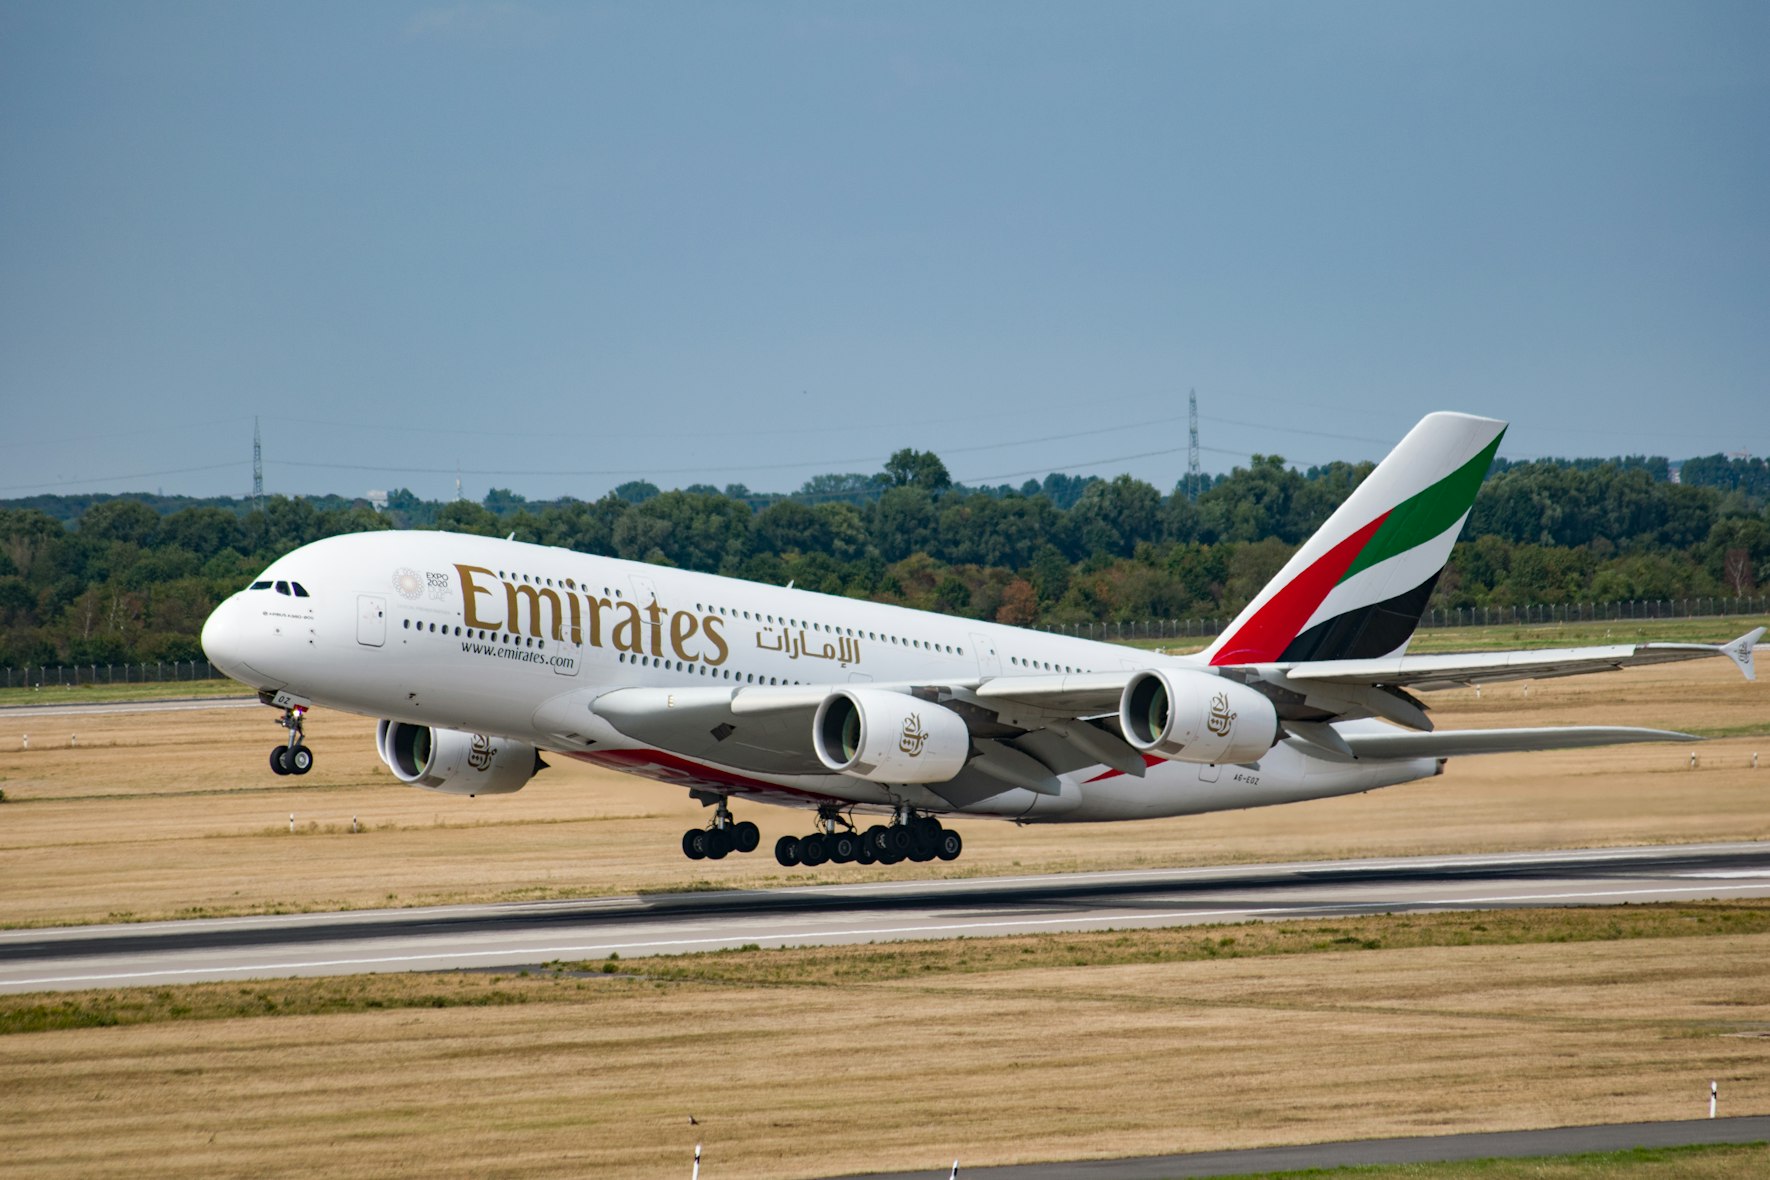 Emirates announces first A350 destinations including key Indian cities